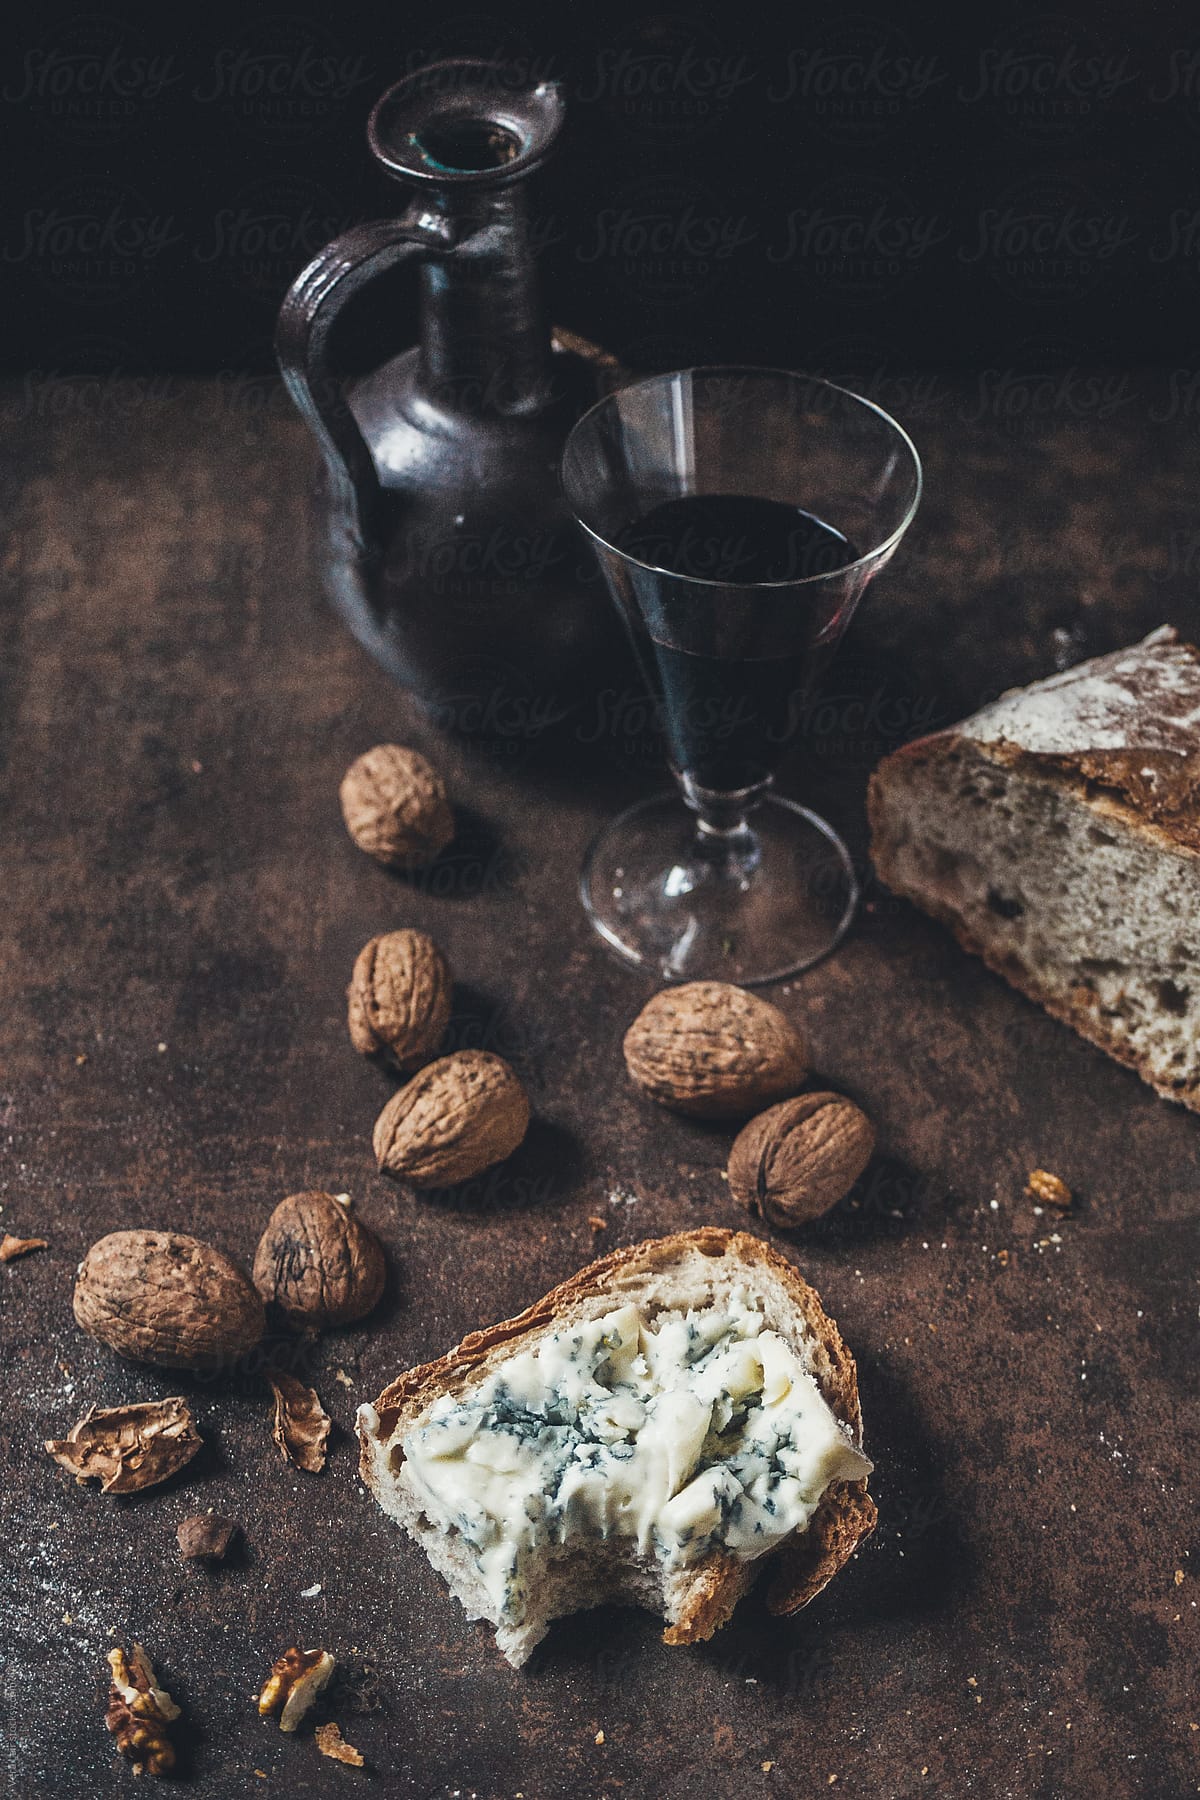 Slice of bread with blue cheese, wine and wallnuts